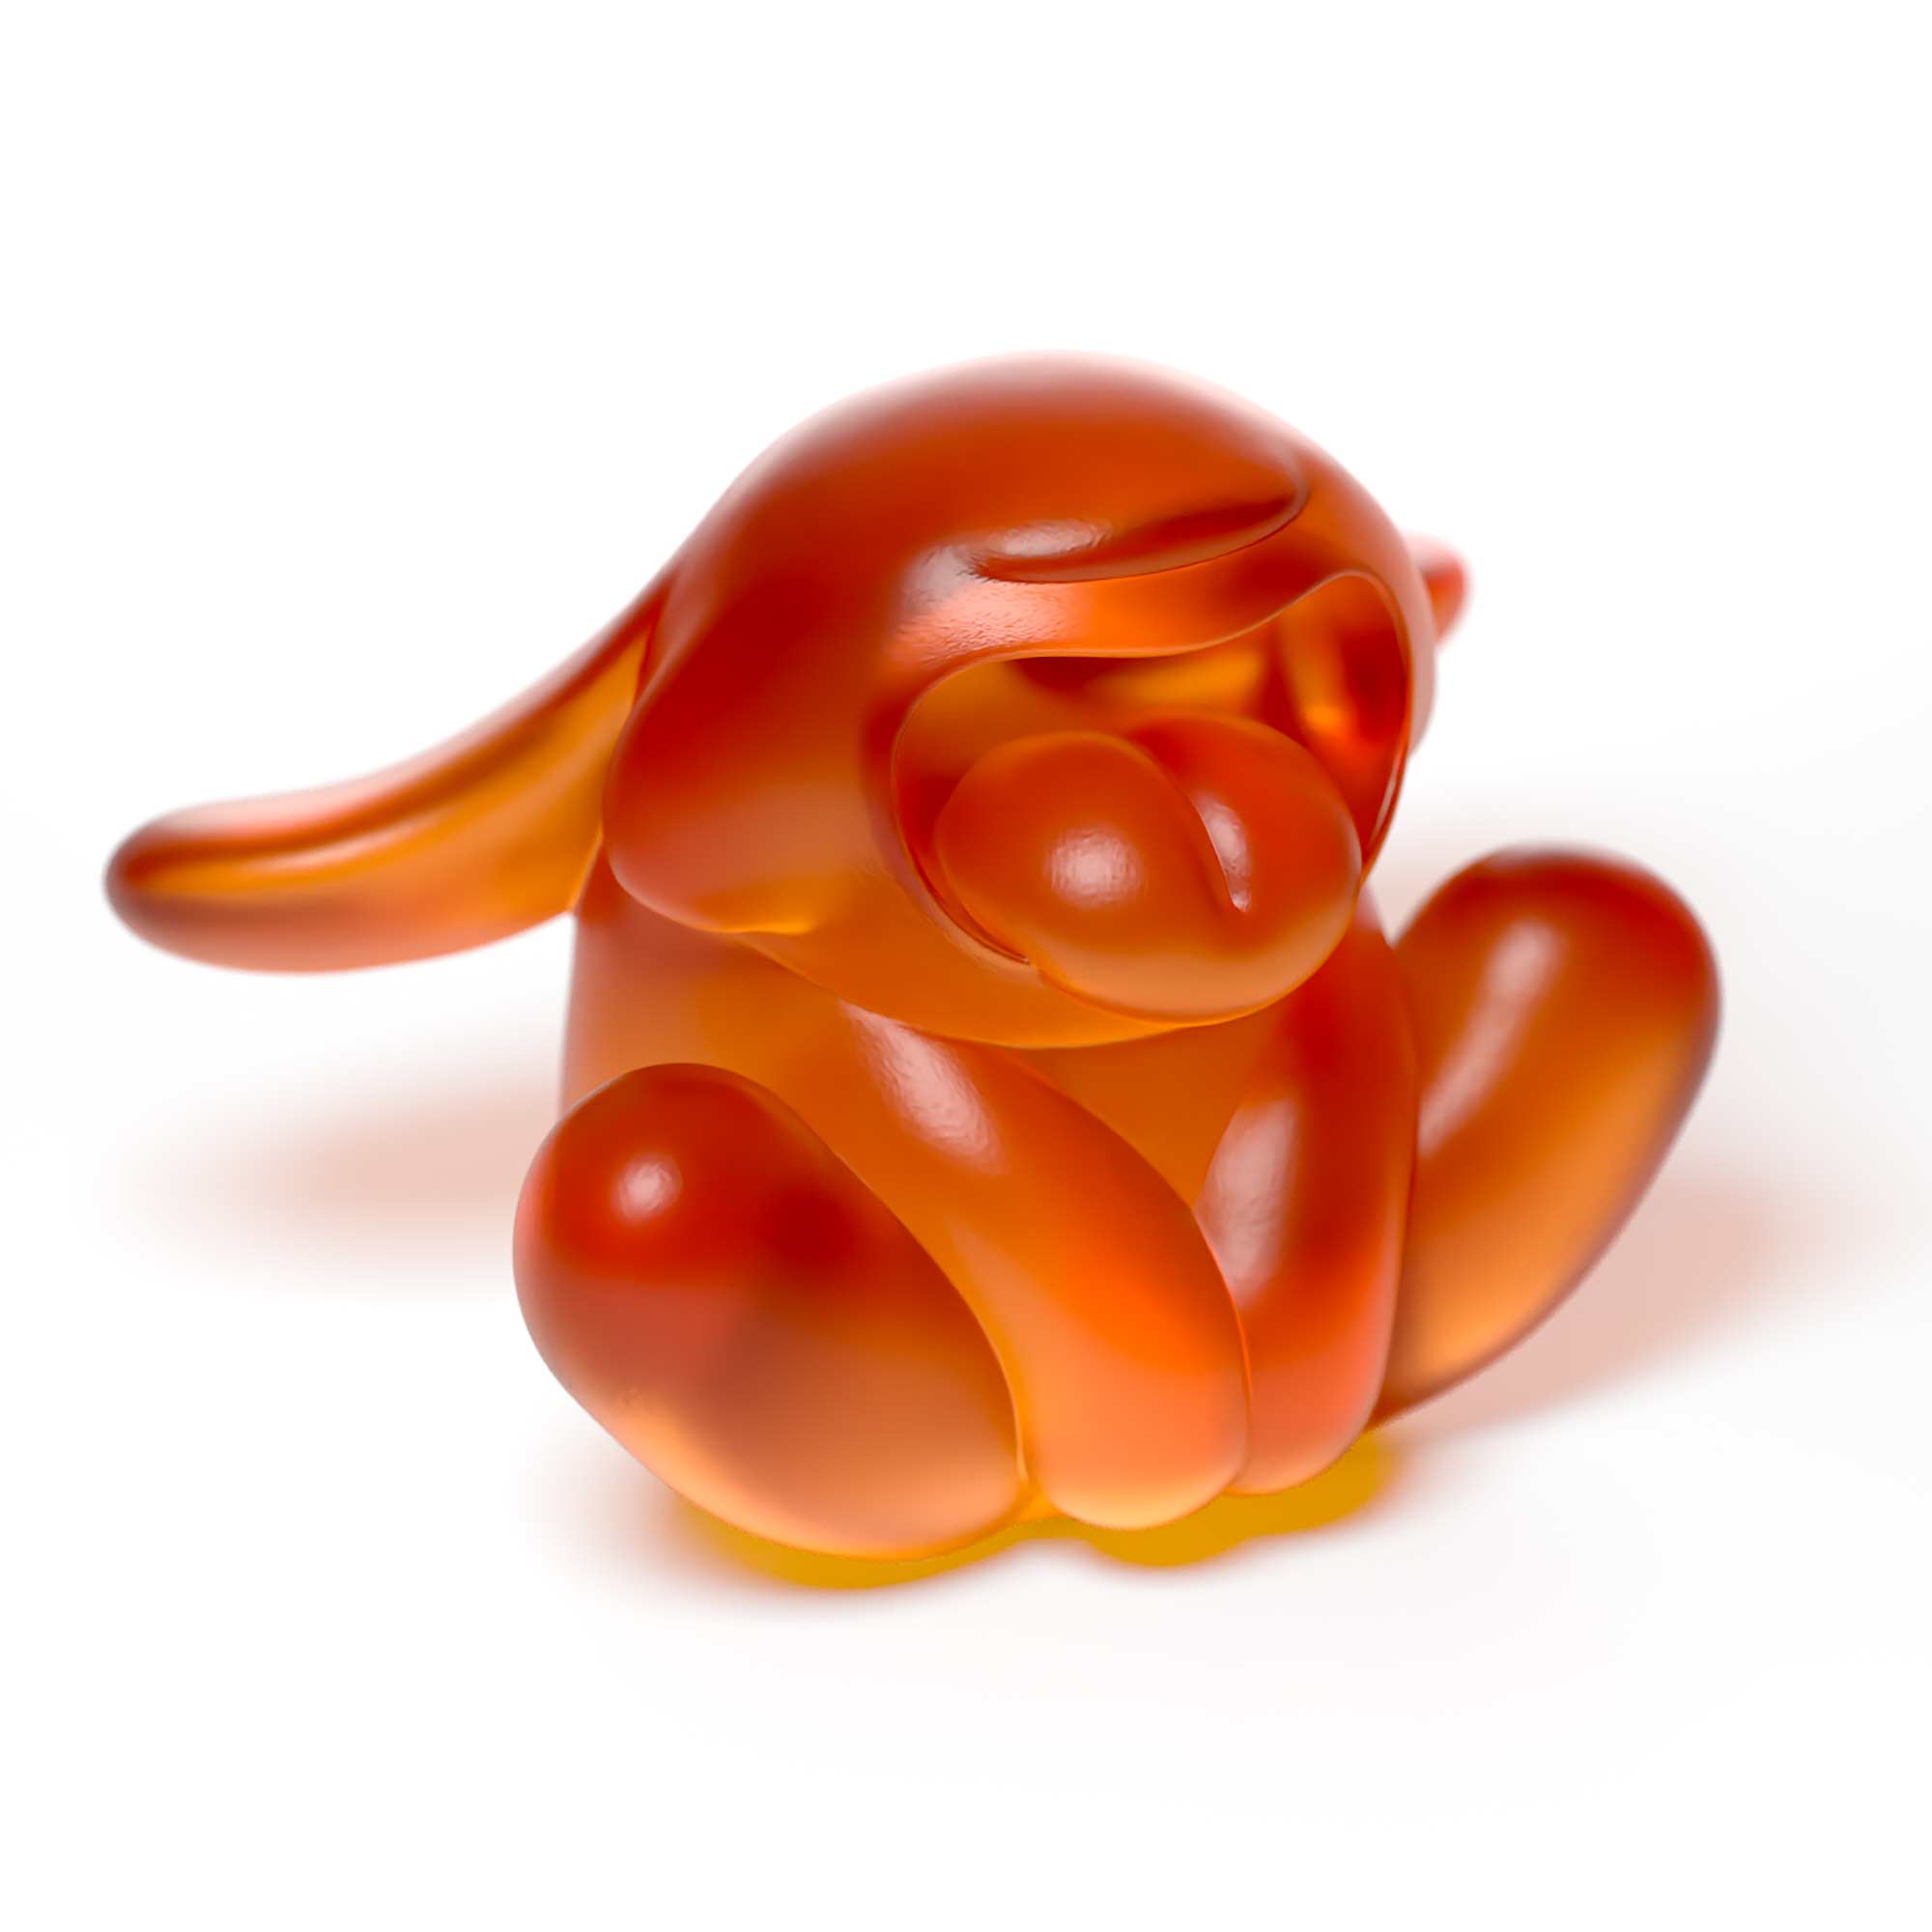 "Bunnie Roar Crystal," a sculpture, amber color, is an artistic creation by Ferdi B Dick 00  hero view